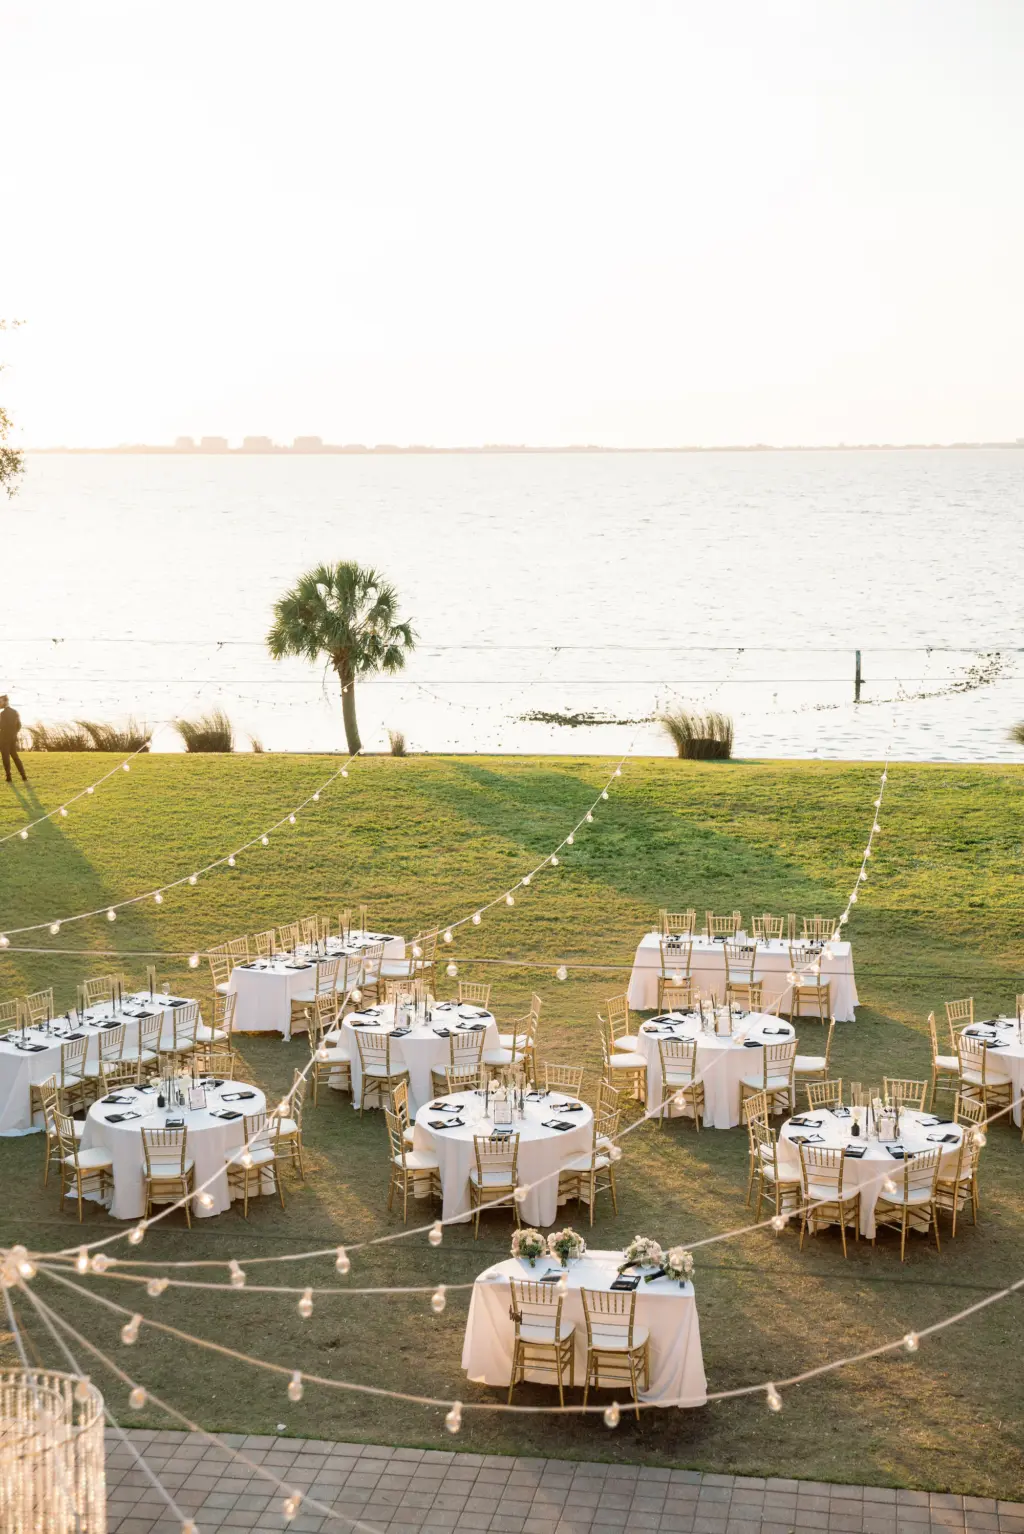 Timeless Black, White and Gold Outdoor Waterfront Wedding Reception | Sarasota Private Mansion Venue Powel Crosley Estate